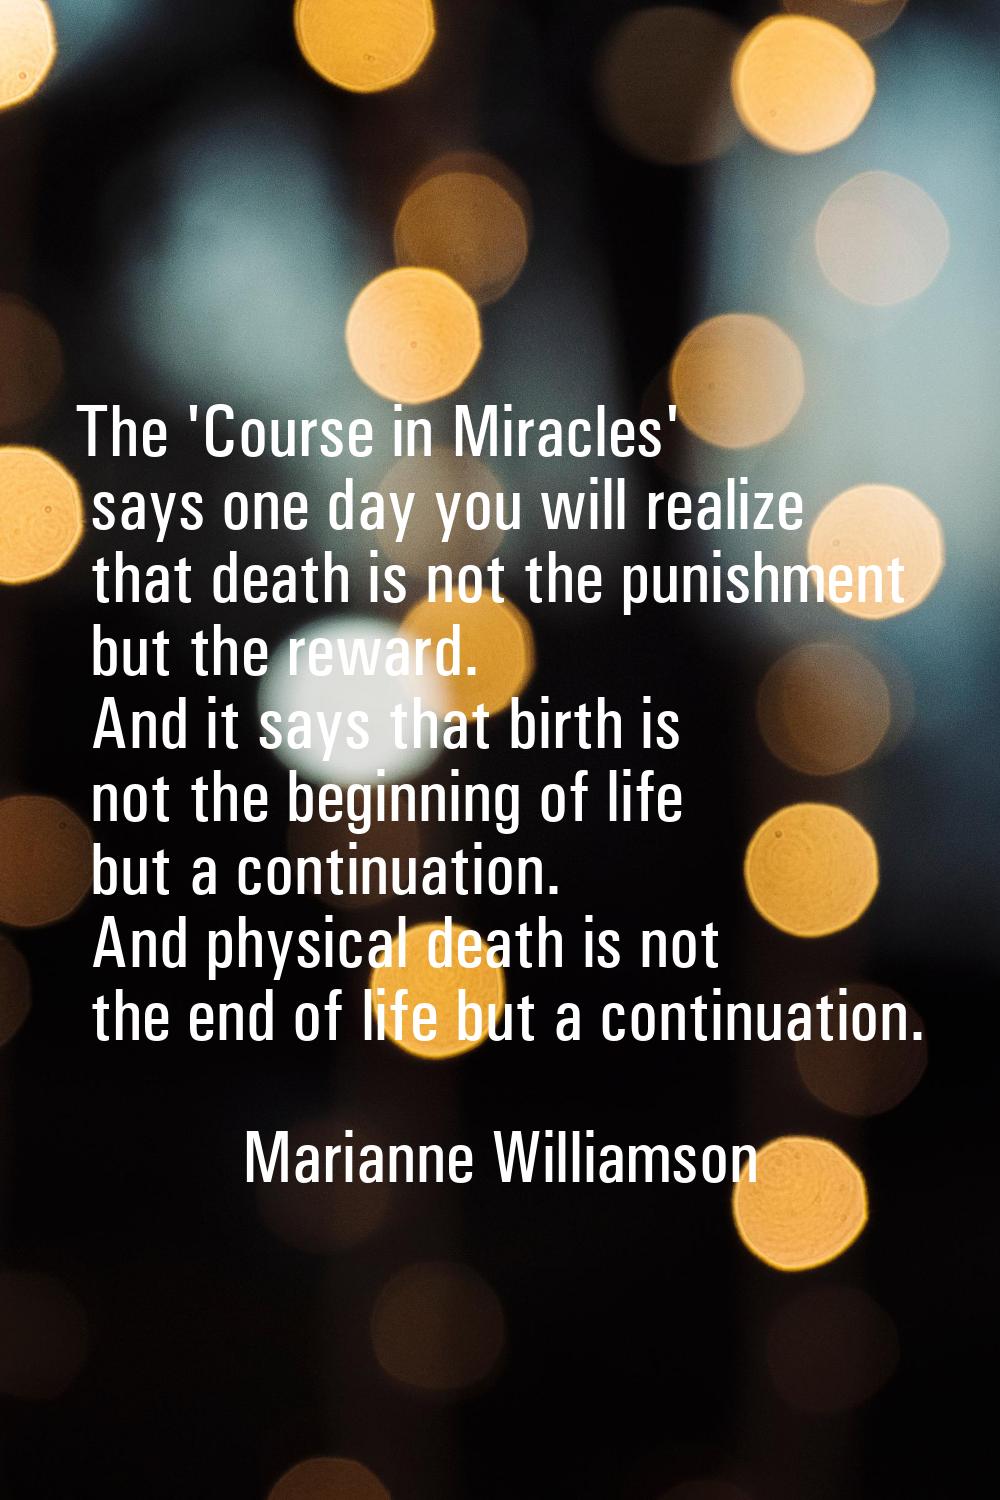 The 'Course in Miracles' says one day you will realize that death is not the punishment but the rew